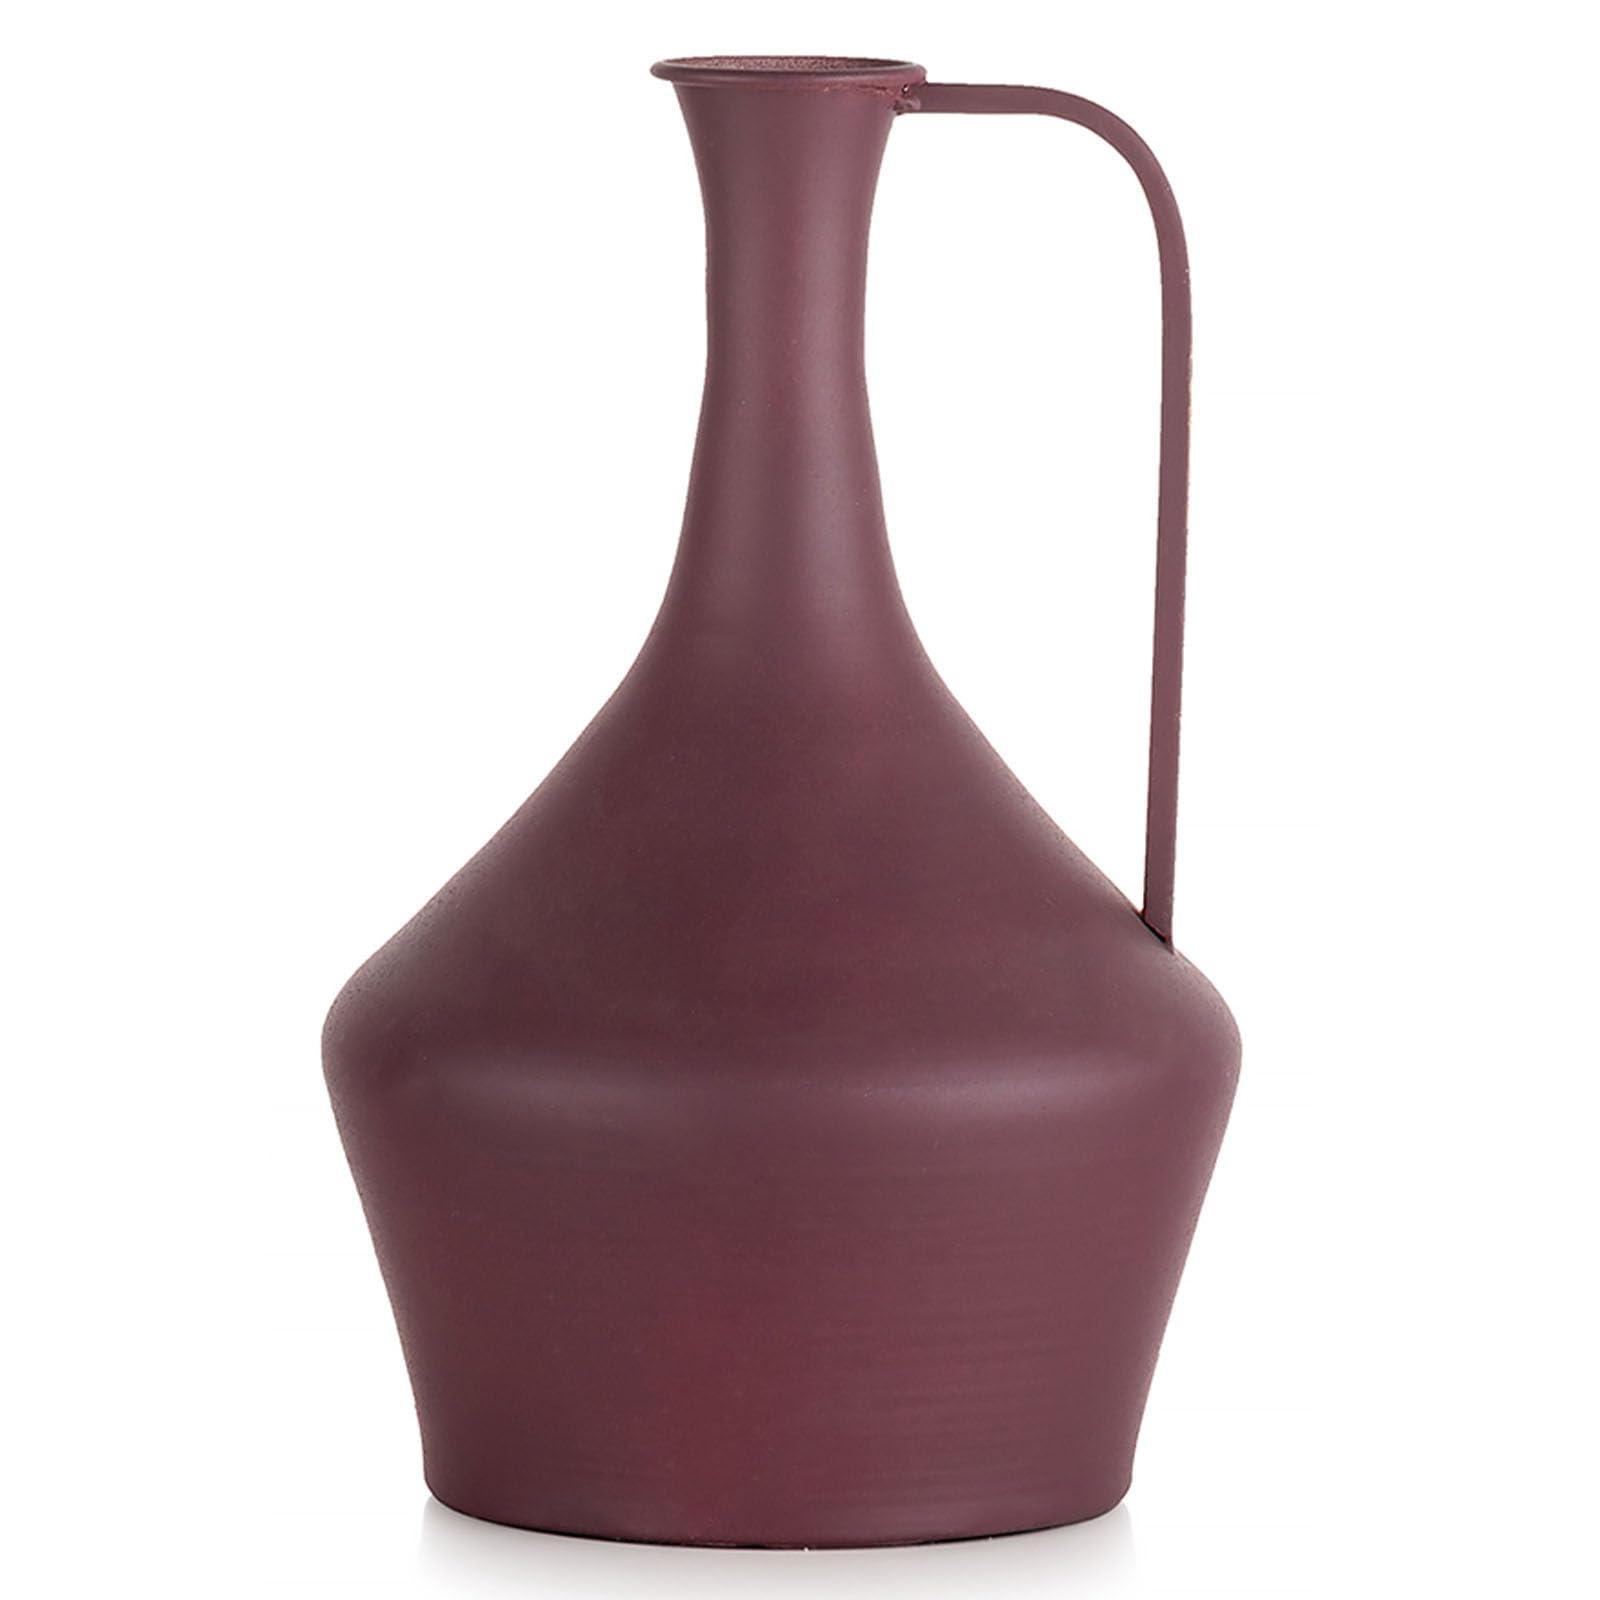 Sziqiqi Metal Pitcher Flowers Vases - 26cm Modern Vases with Handle Single Stem Vase for Table Red Morandi Matte Vases for Artificial Plants Love Gift for Mum Women Wife Sister 0